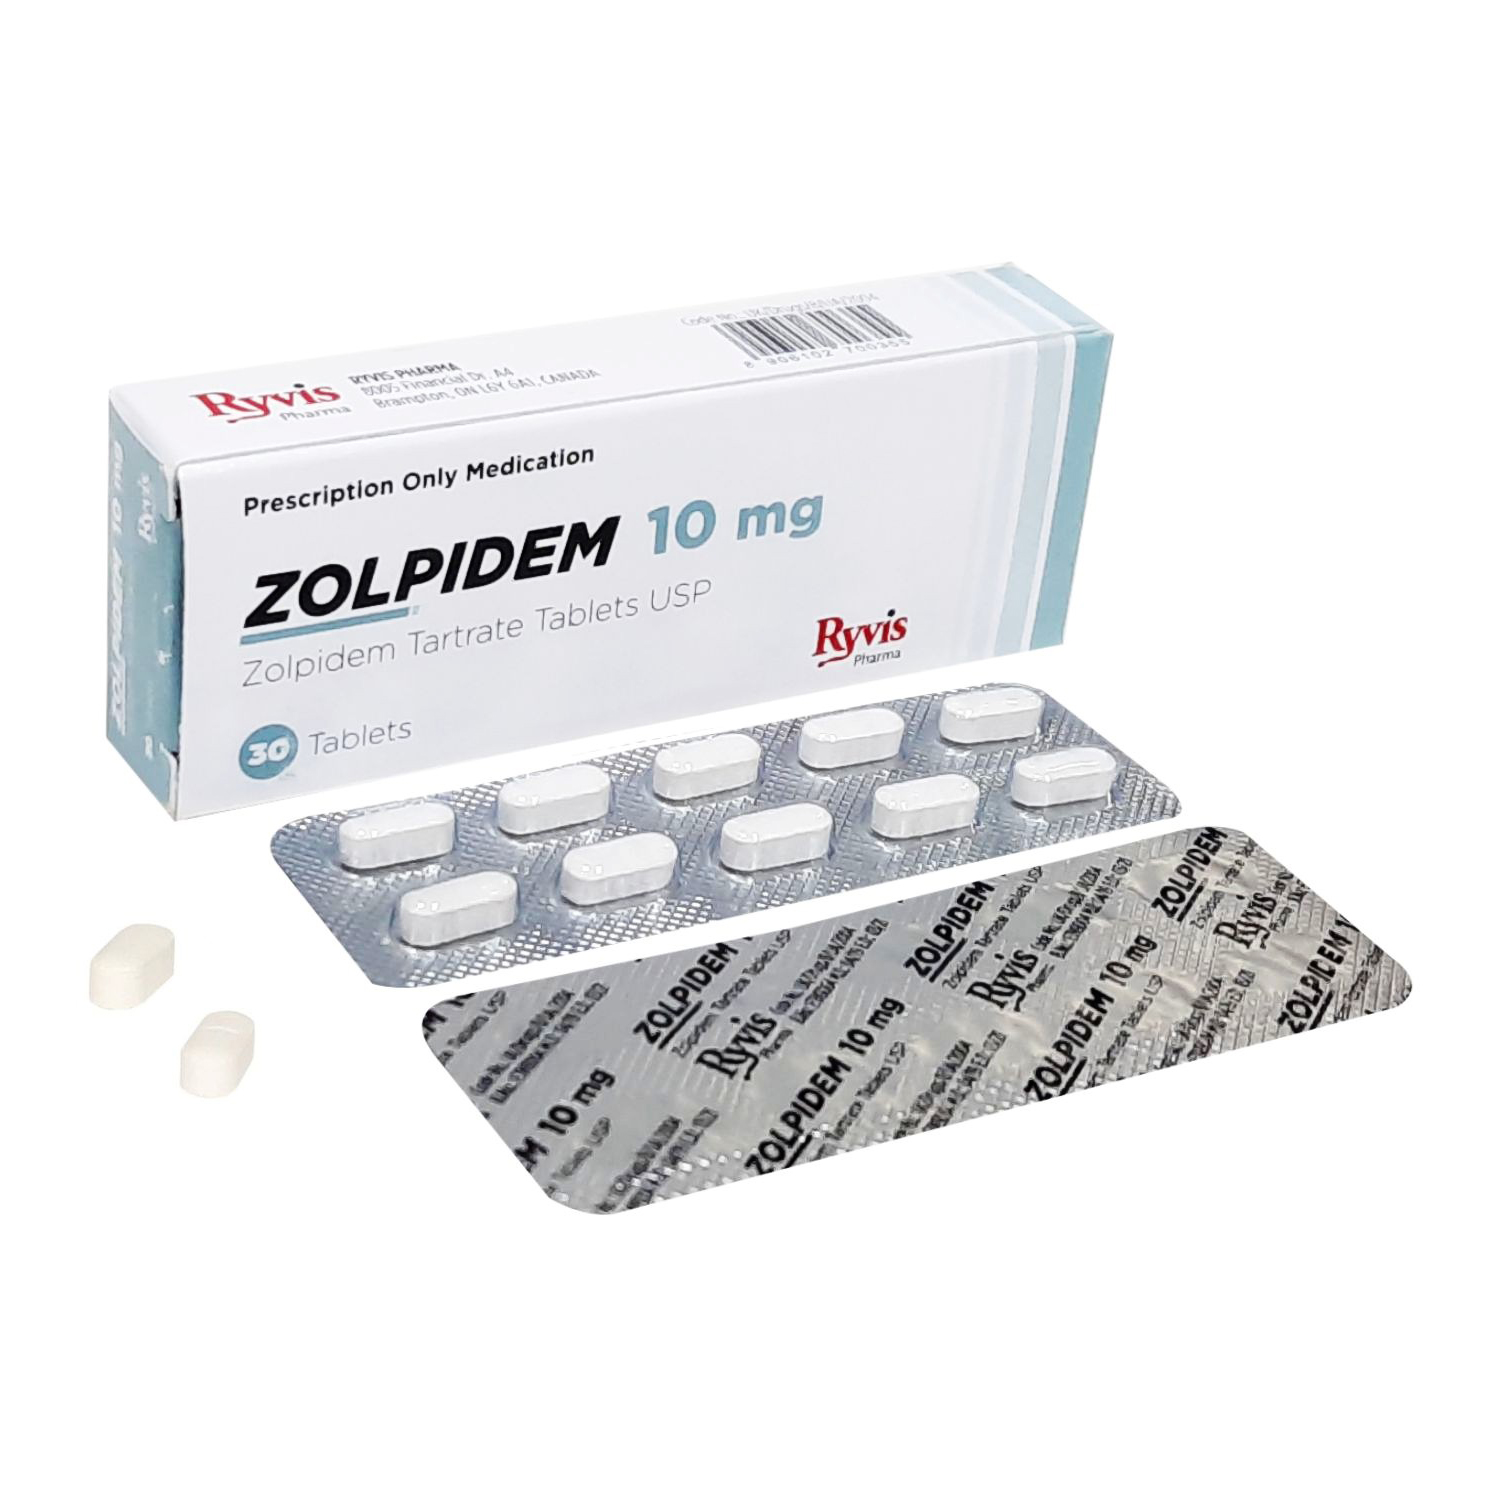 Buy Ambien 10Mg Online Overnight Delivery